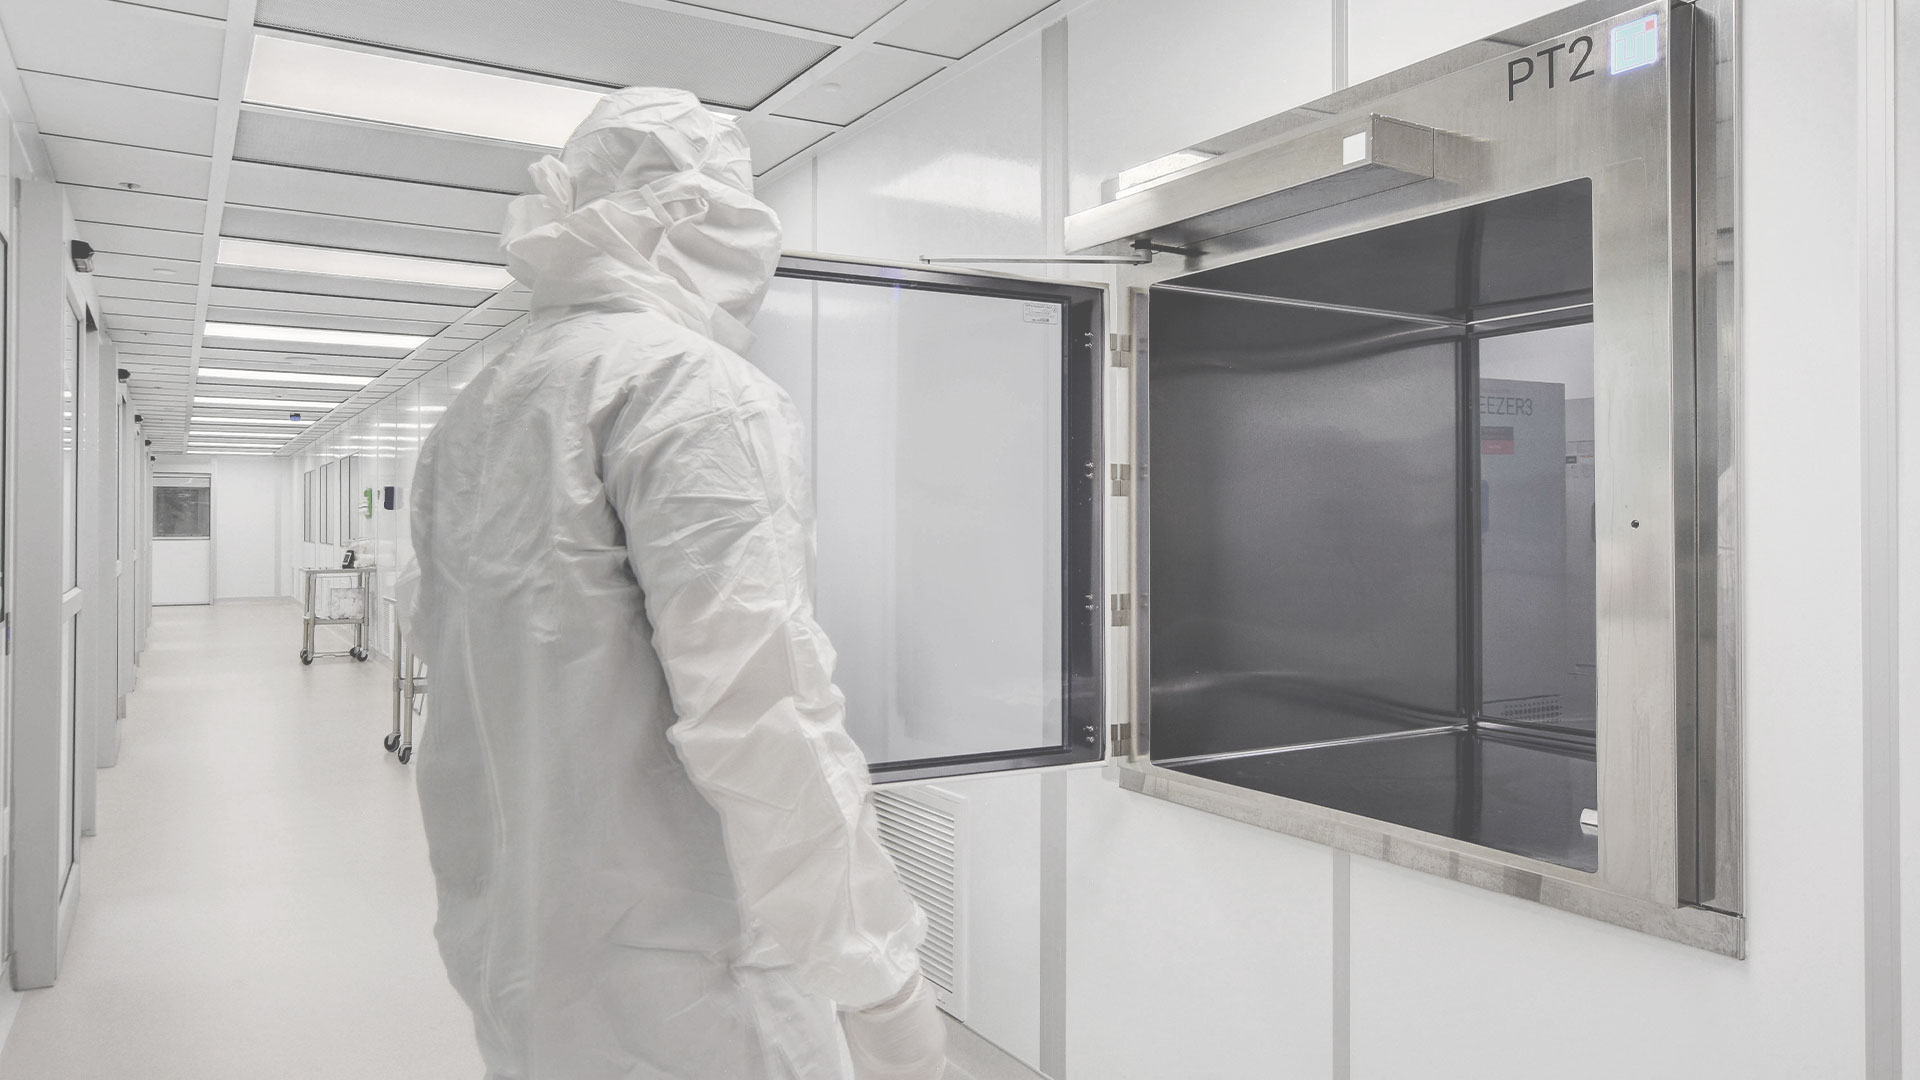 Clean Room Suppliers Clean room by Allied Cleanrooms - USP 797, and ISO 4, ISO 5, ISO 6, ISO 7, and IS0 8, cGMP cleanroom manufacturing, soft wall cleanrooms FED-STD-209E and ISO 14644-1, control contamination